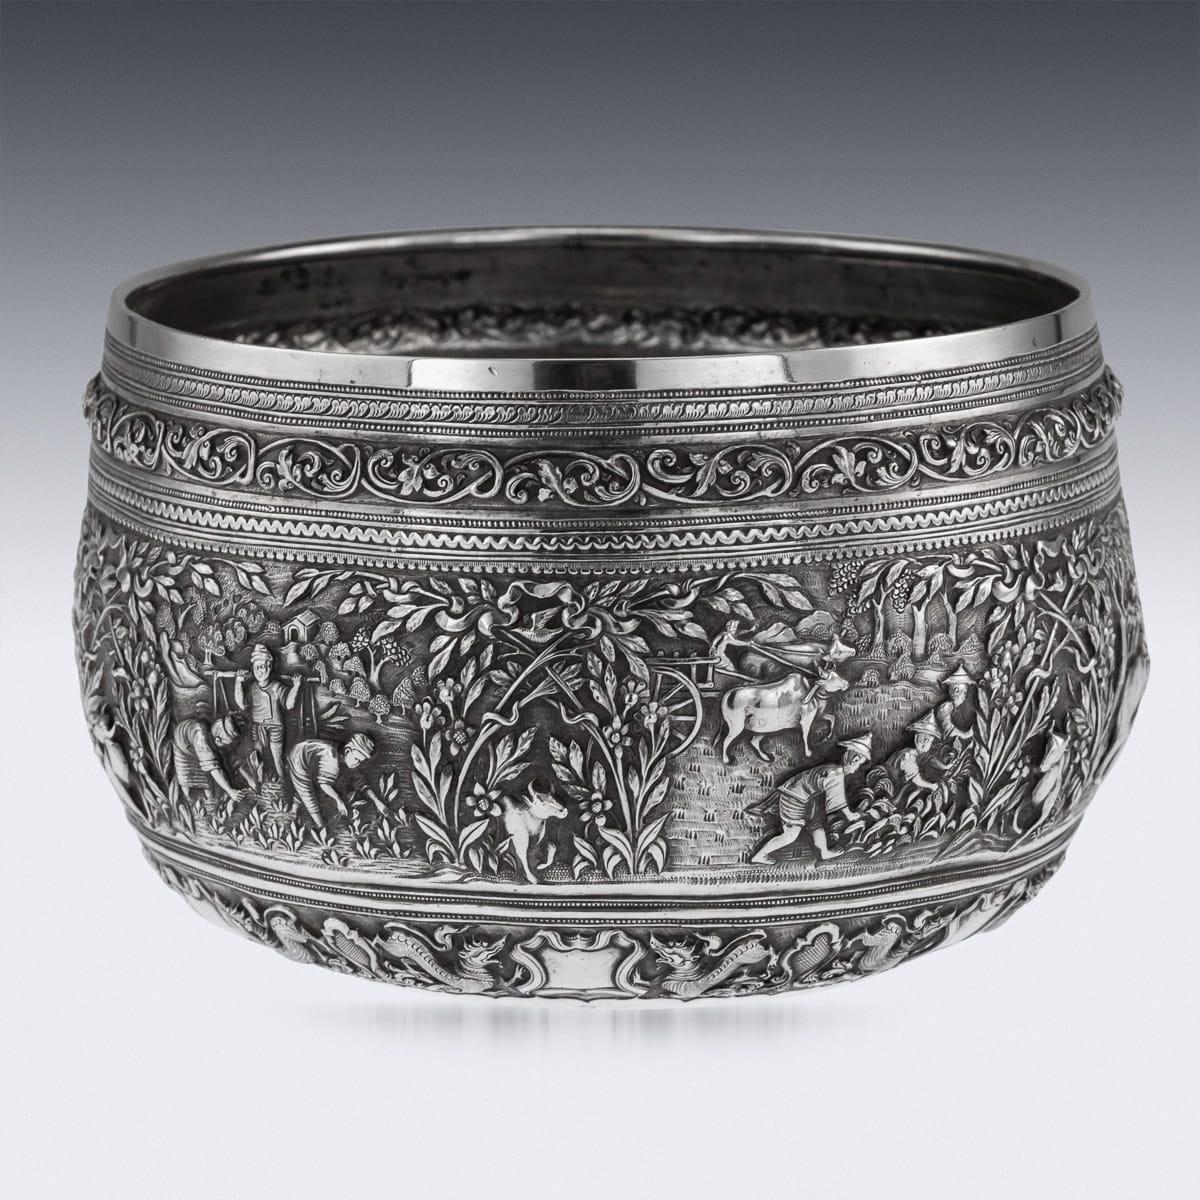 Antique late 19th century Burmese (Myanmar) exceptional solid silver repousse' bowl, repousse' decorated in high detail and relief with scenes of agriculture, elephants helping to move timber, villagers sawing and carrying wood, ploughing the ground